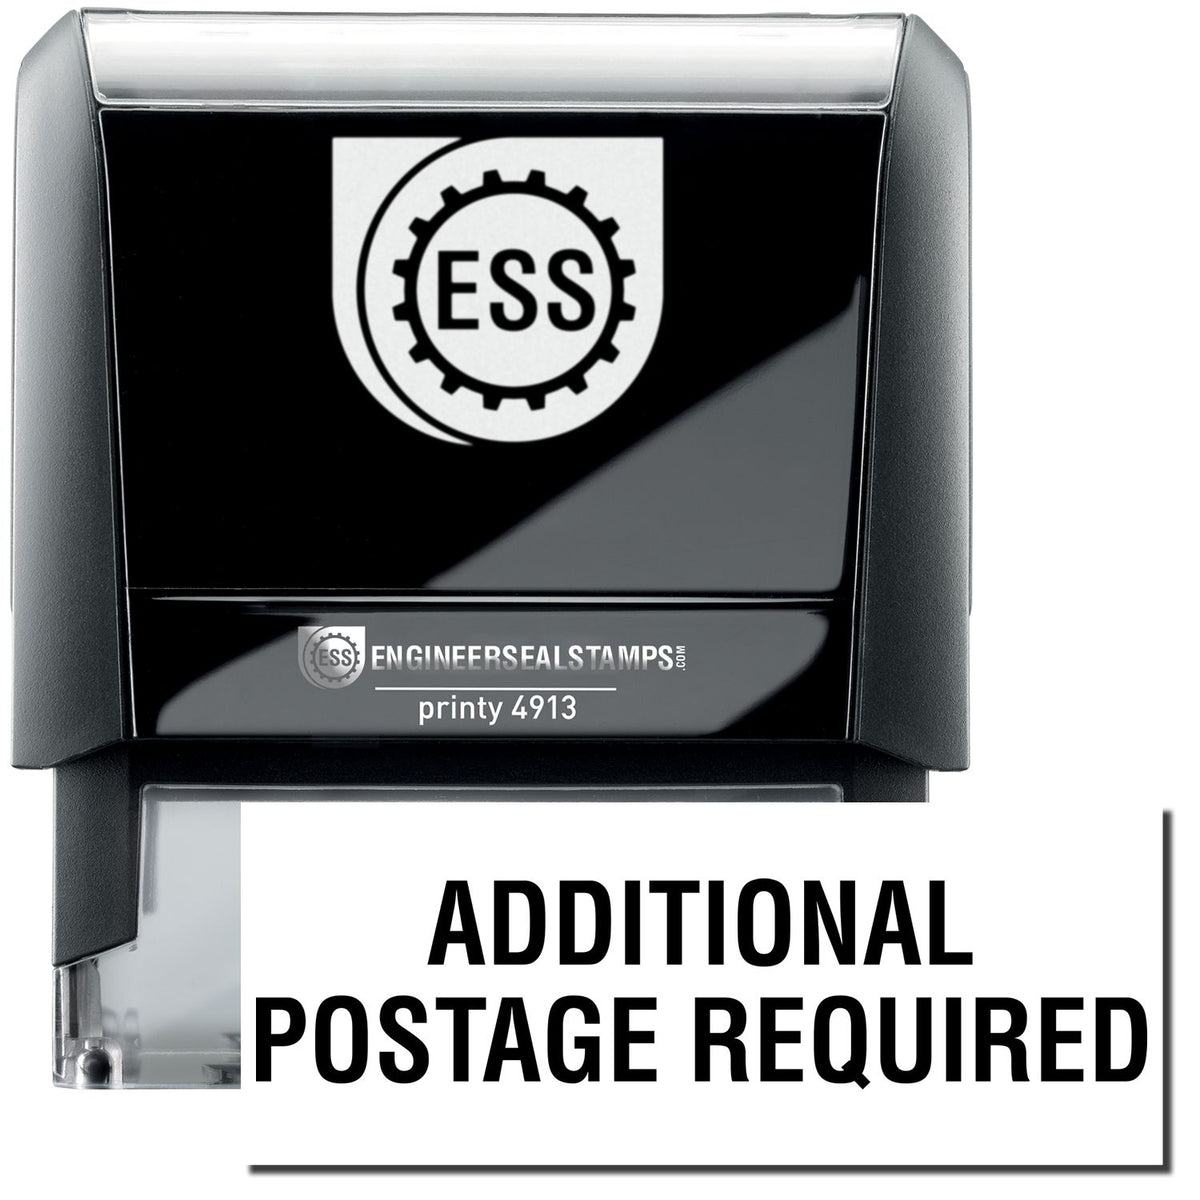 A self-inking stamp with a stamped image showing how the text &quot;ADDITIONAL POSTAGE REQUIRED&quot; in a large font is displayed by it after stamping.